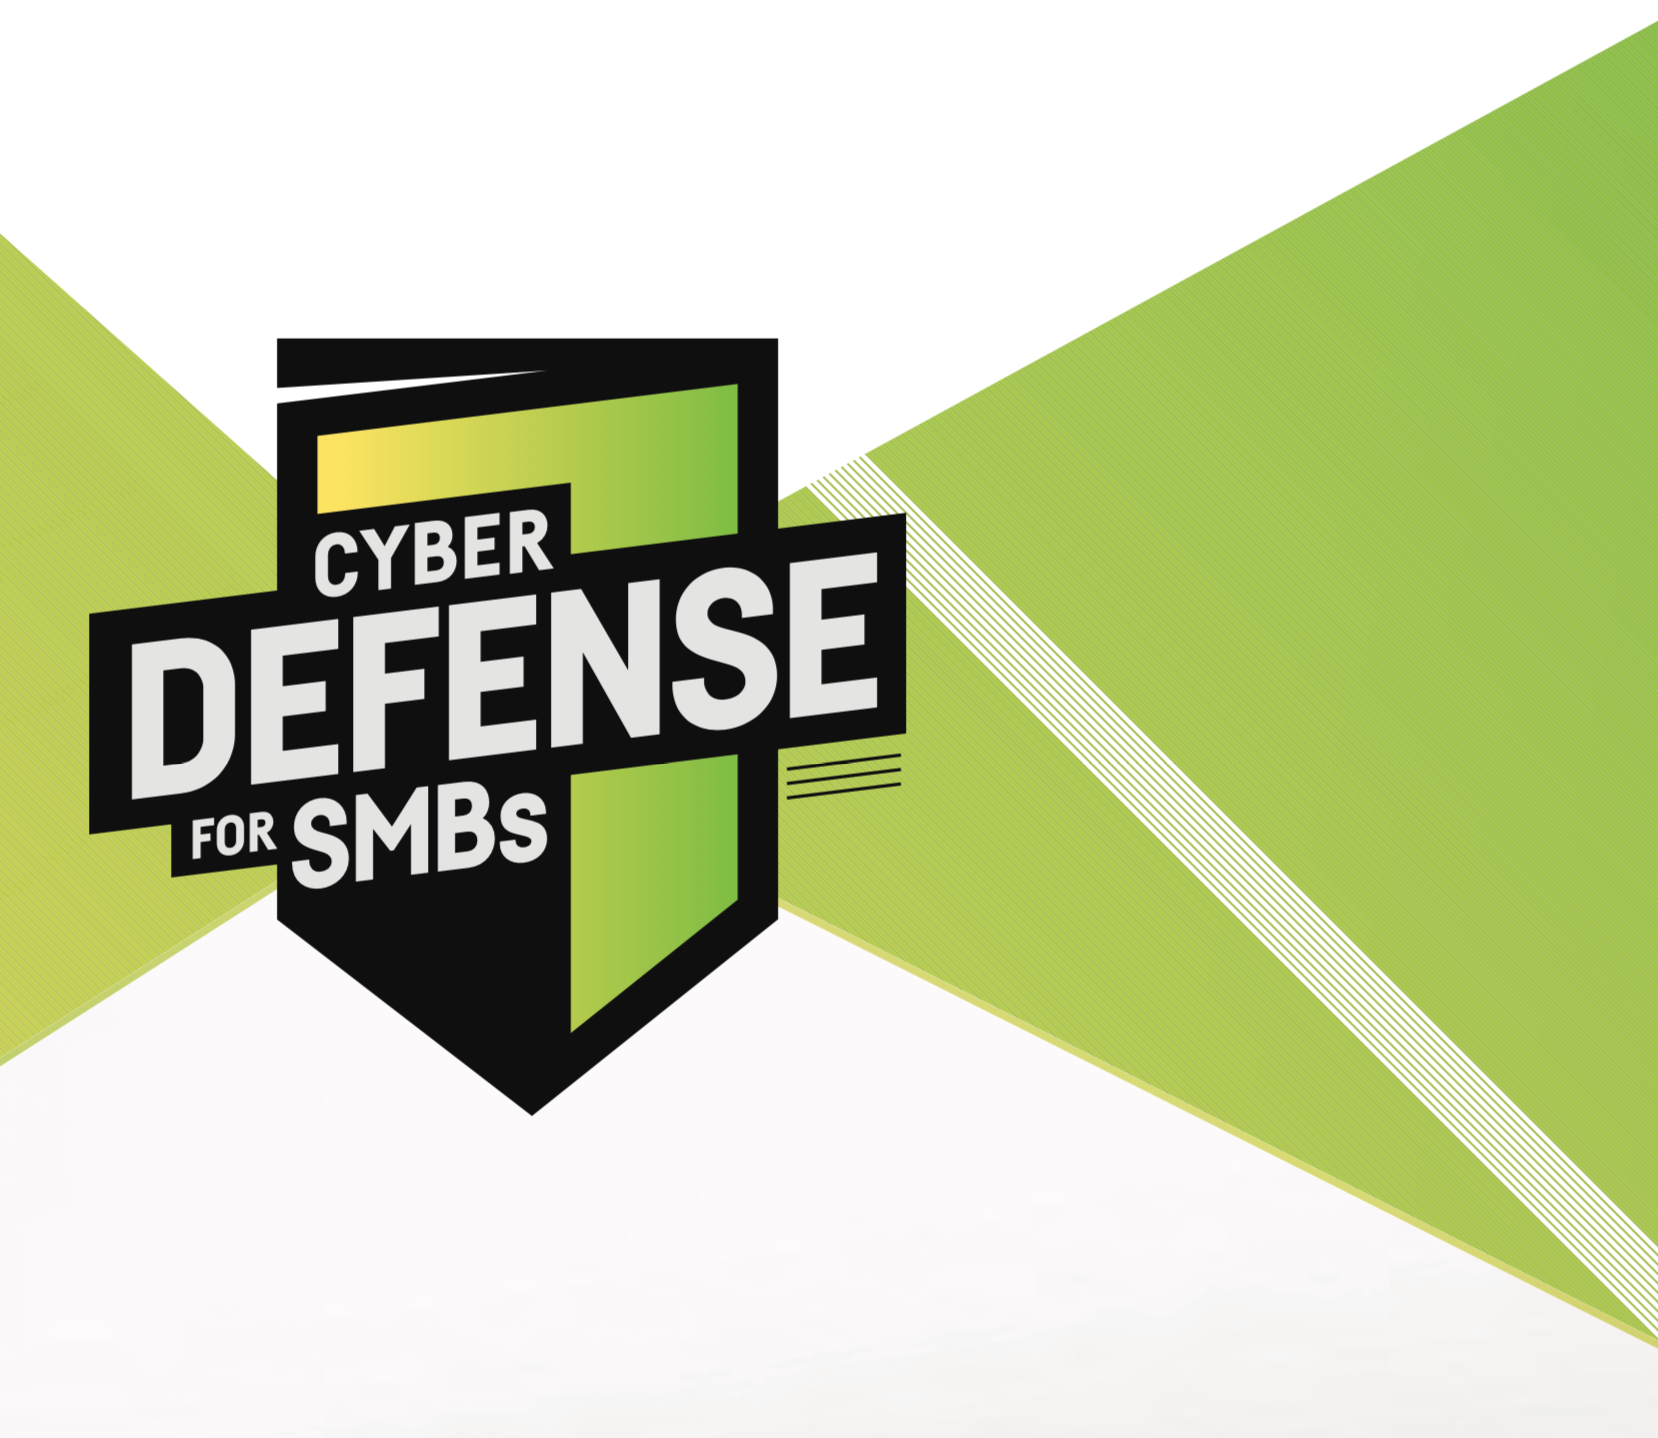 The 'Cyber Defense For SMBs' Program